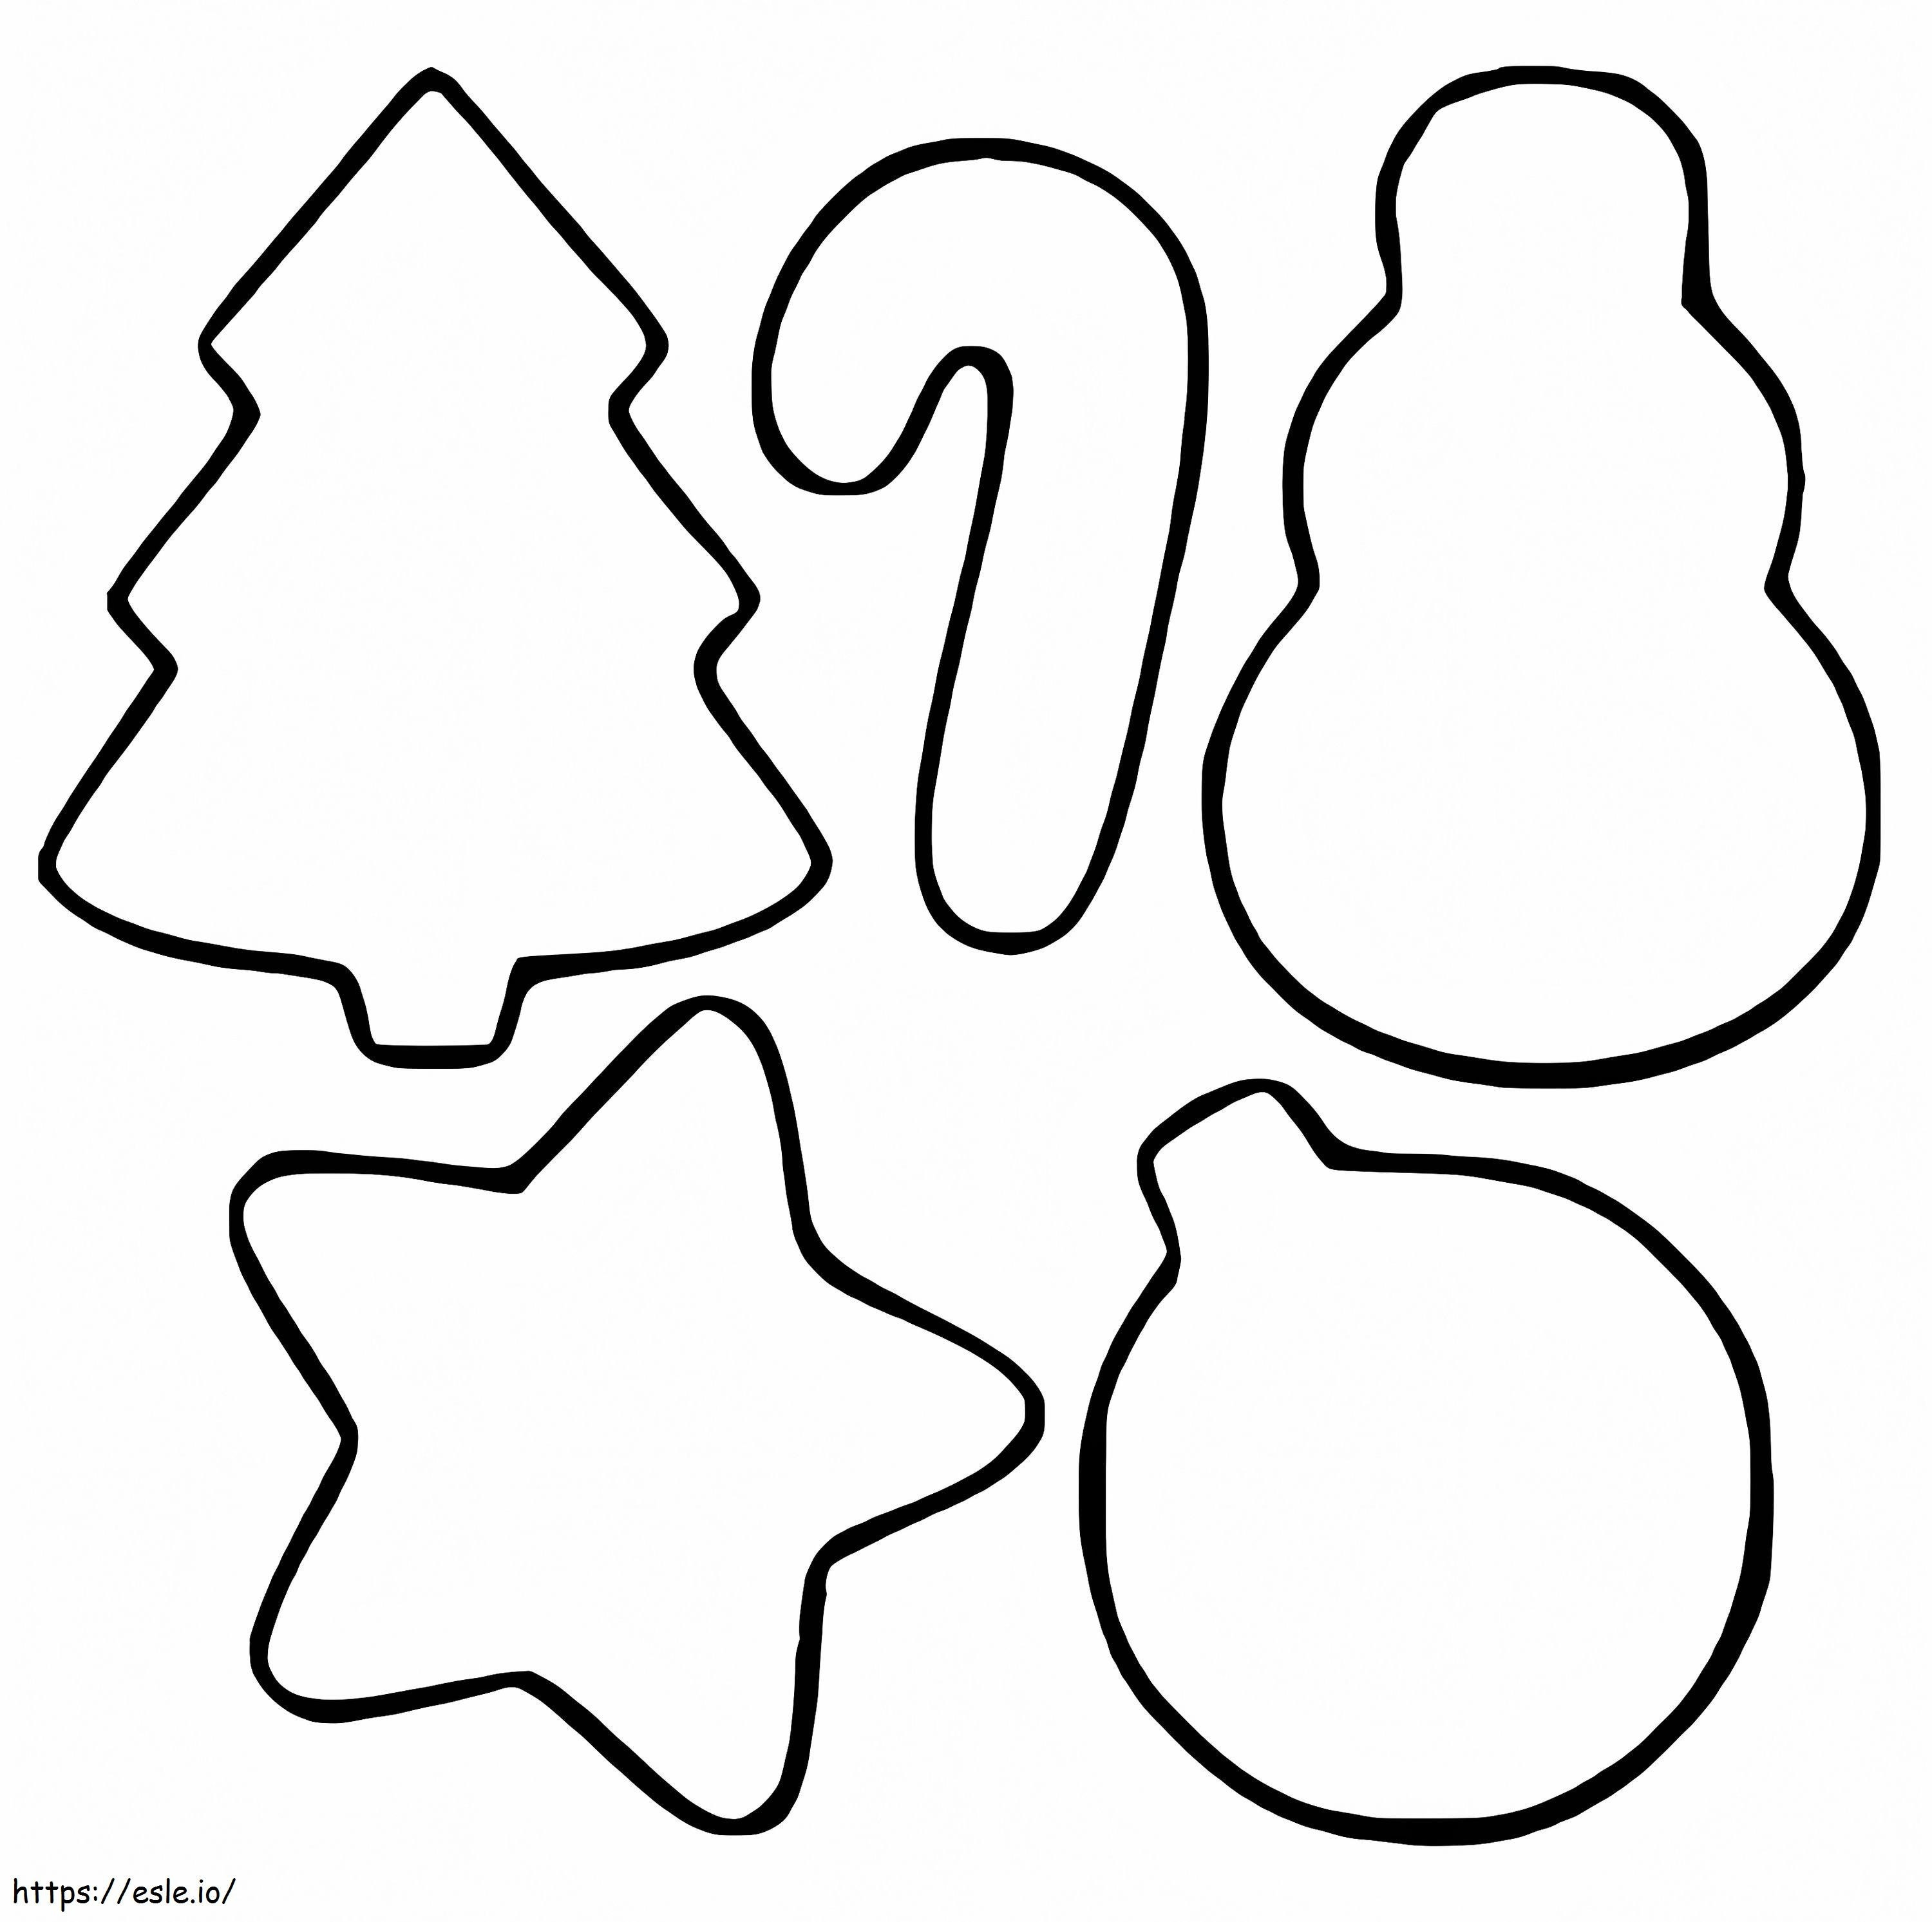 Easy Christmas Cookies coloring page